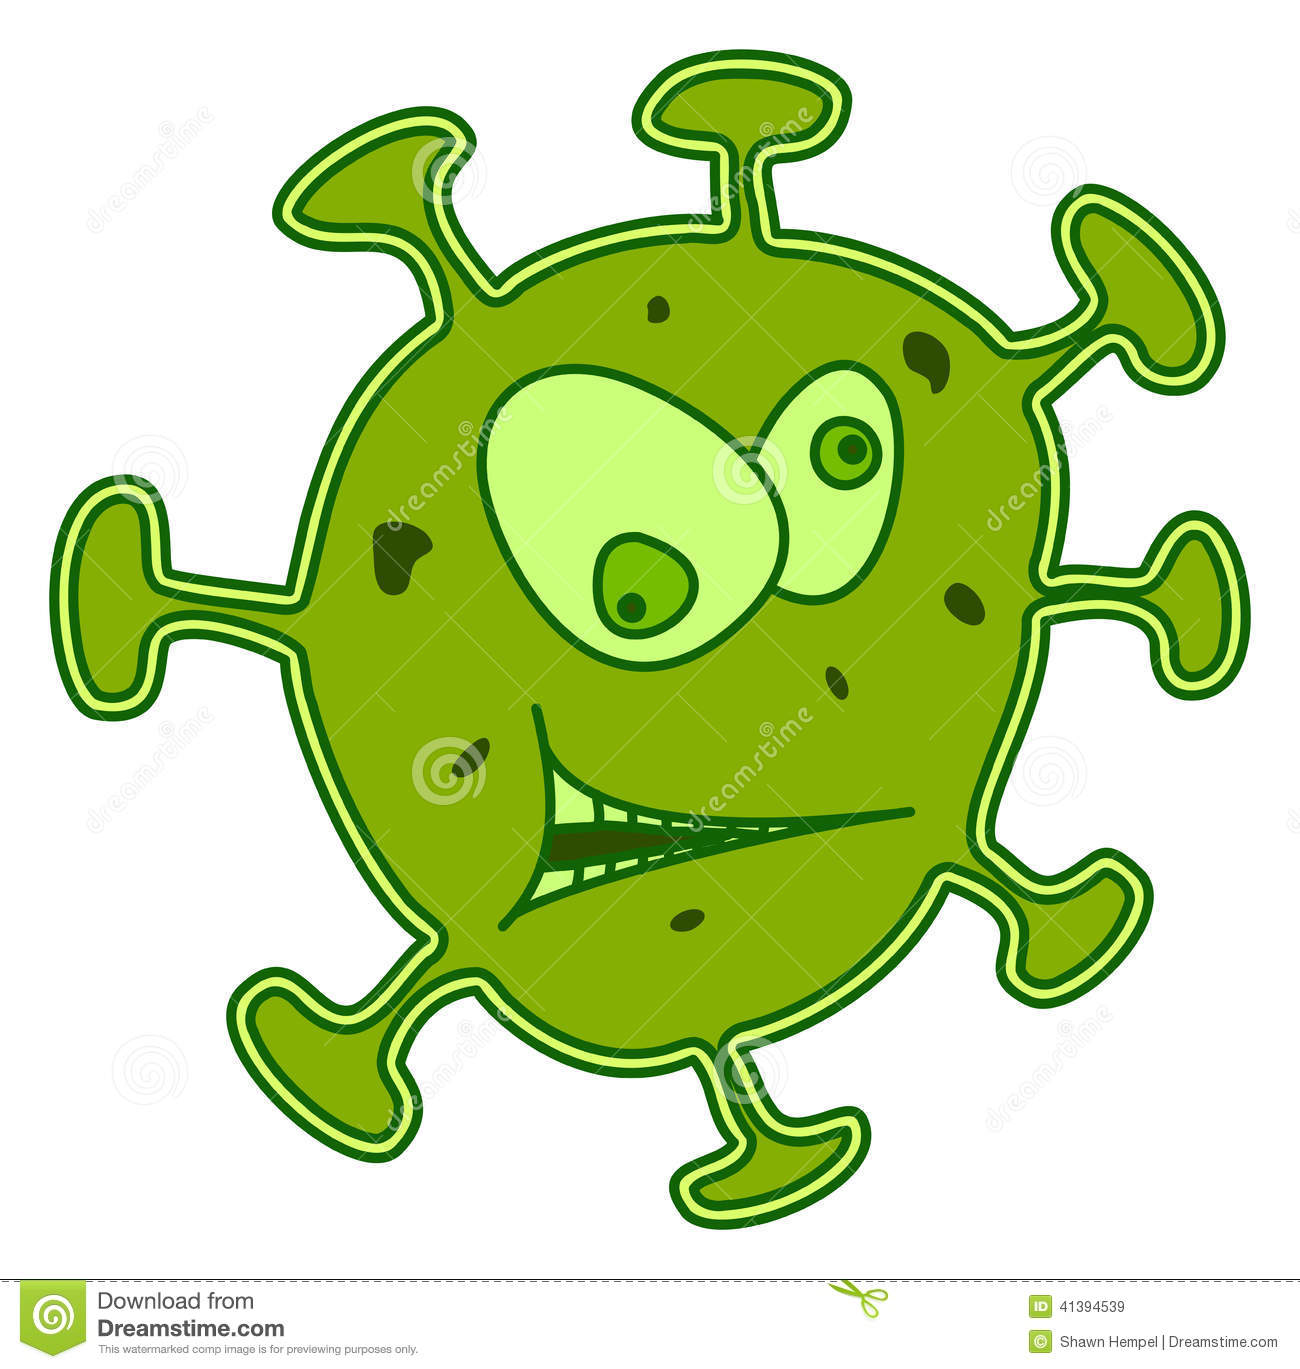 173 Germ free clipart.